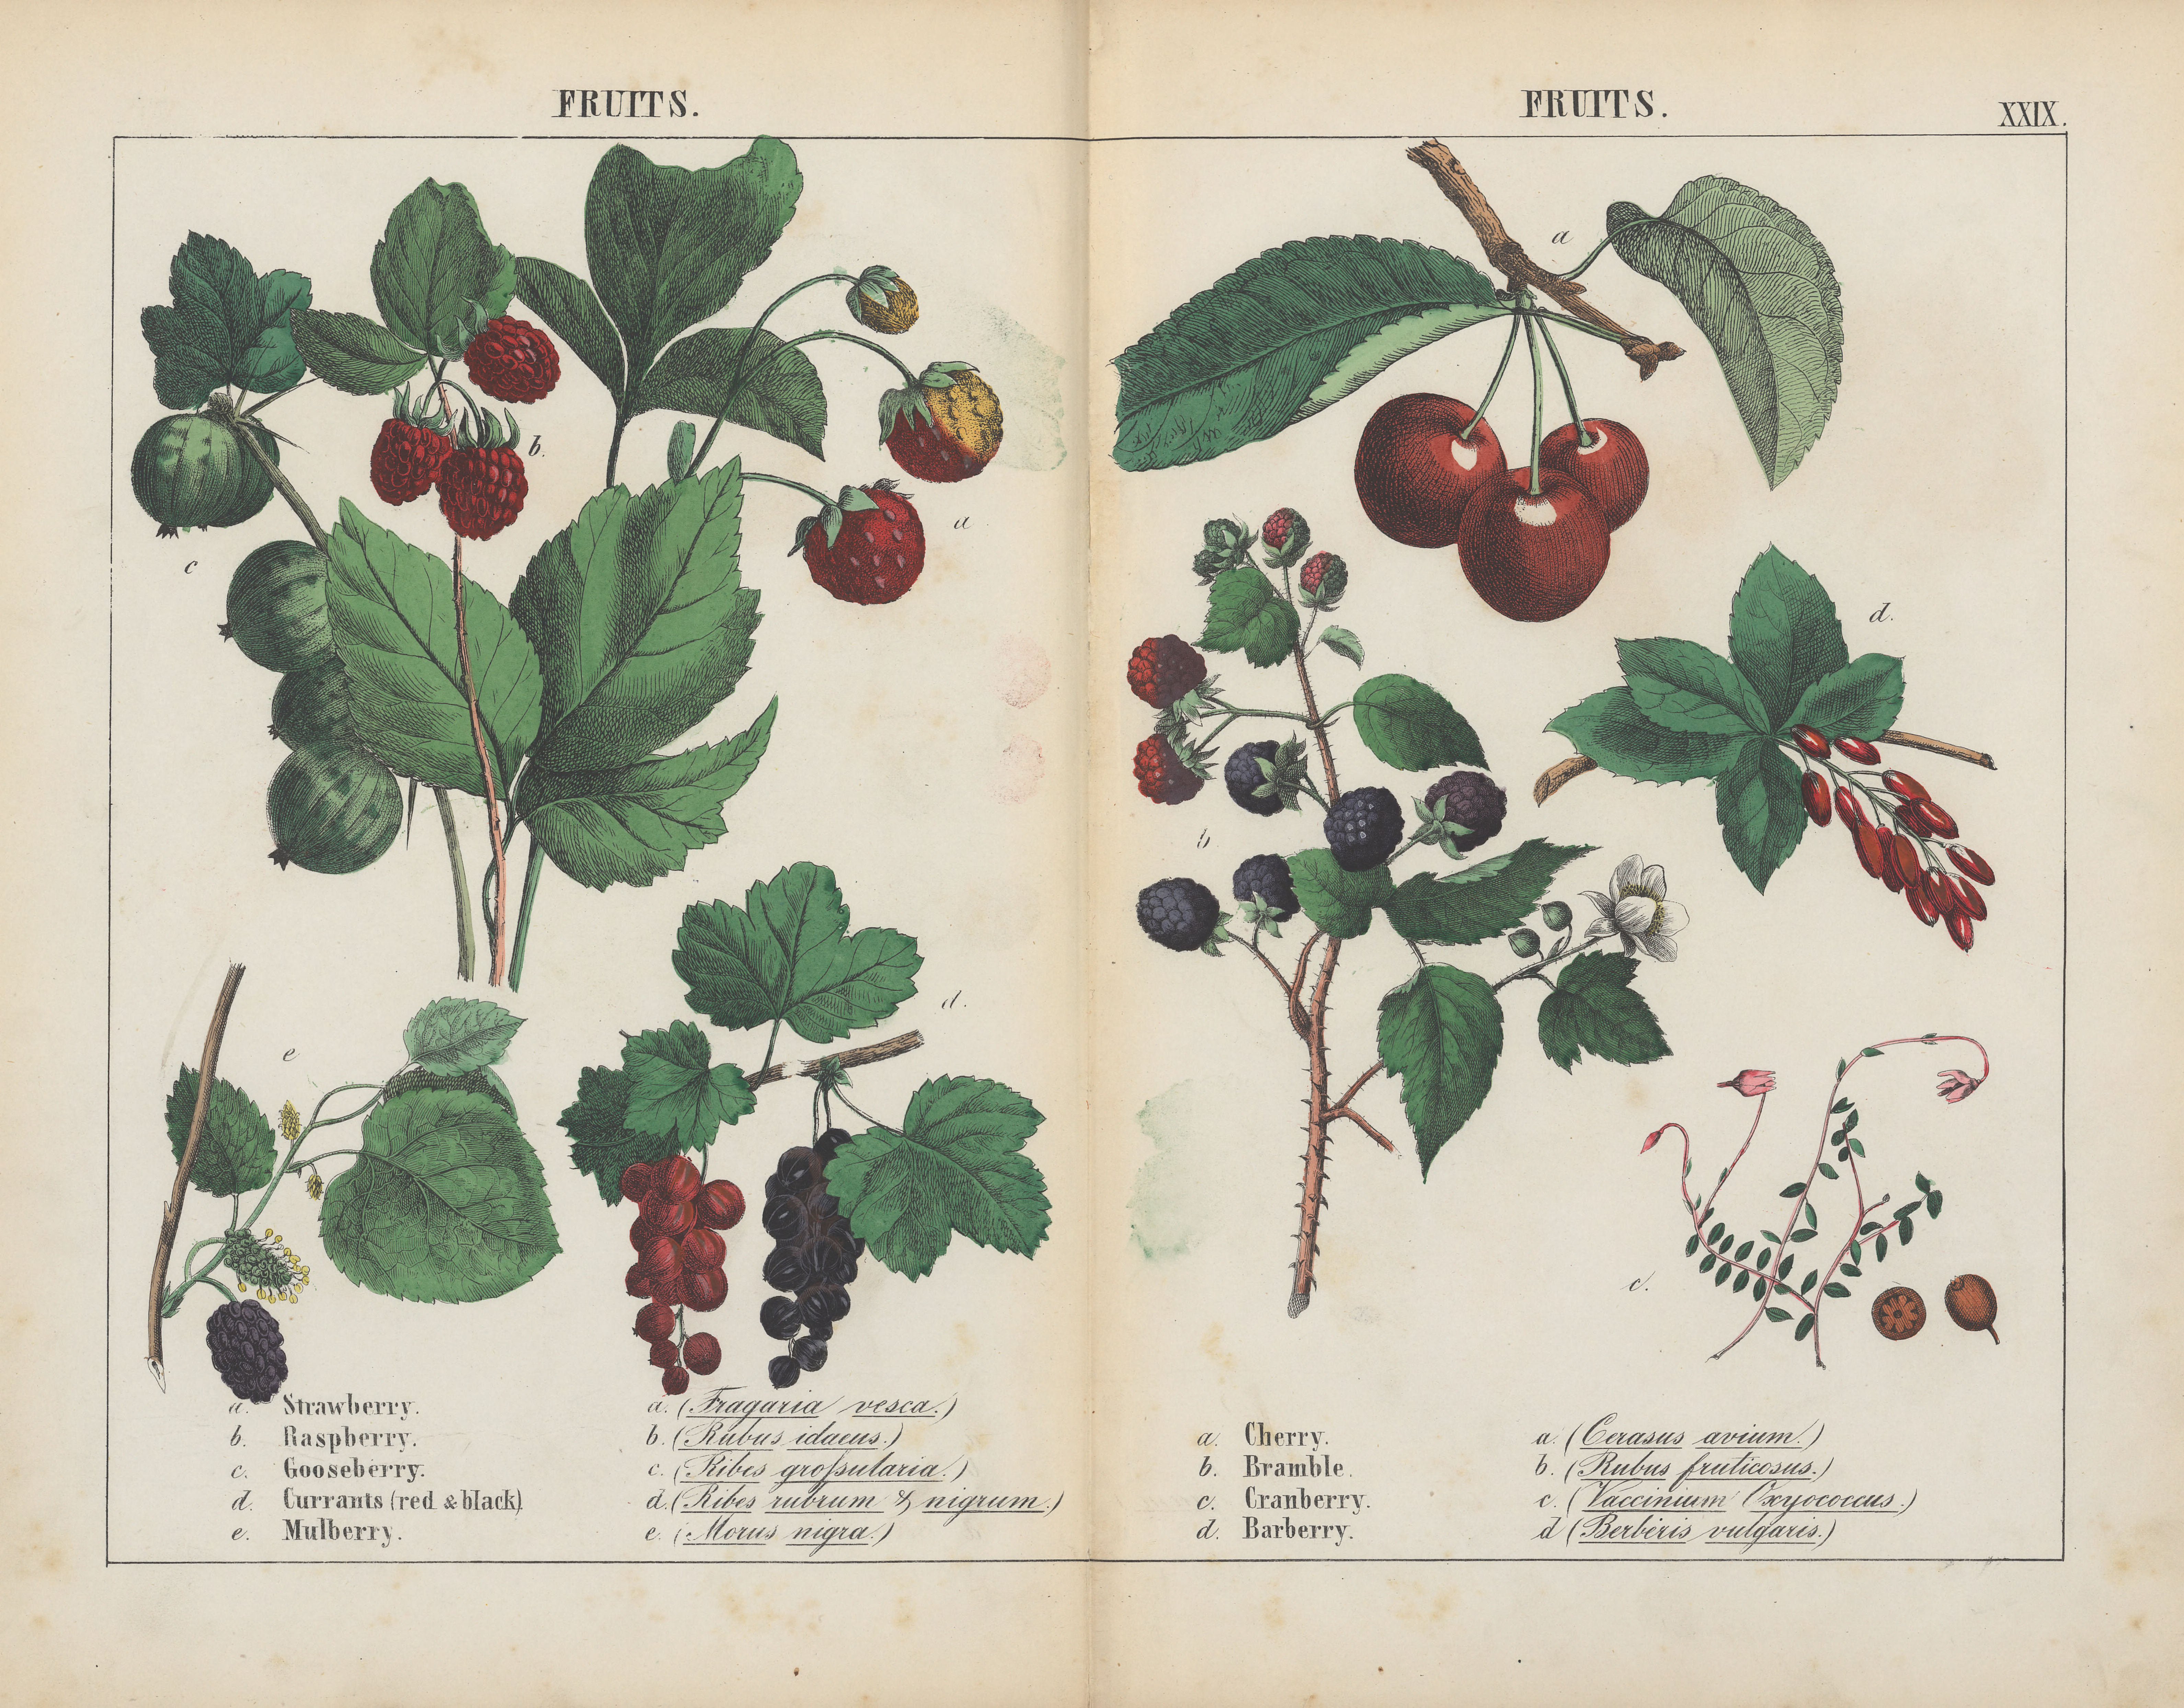 20 Beautiful Free Vintage Fruit And Vegetable Prints - Picture Box